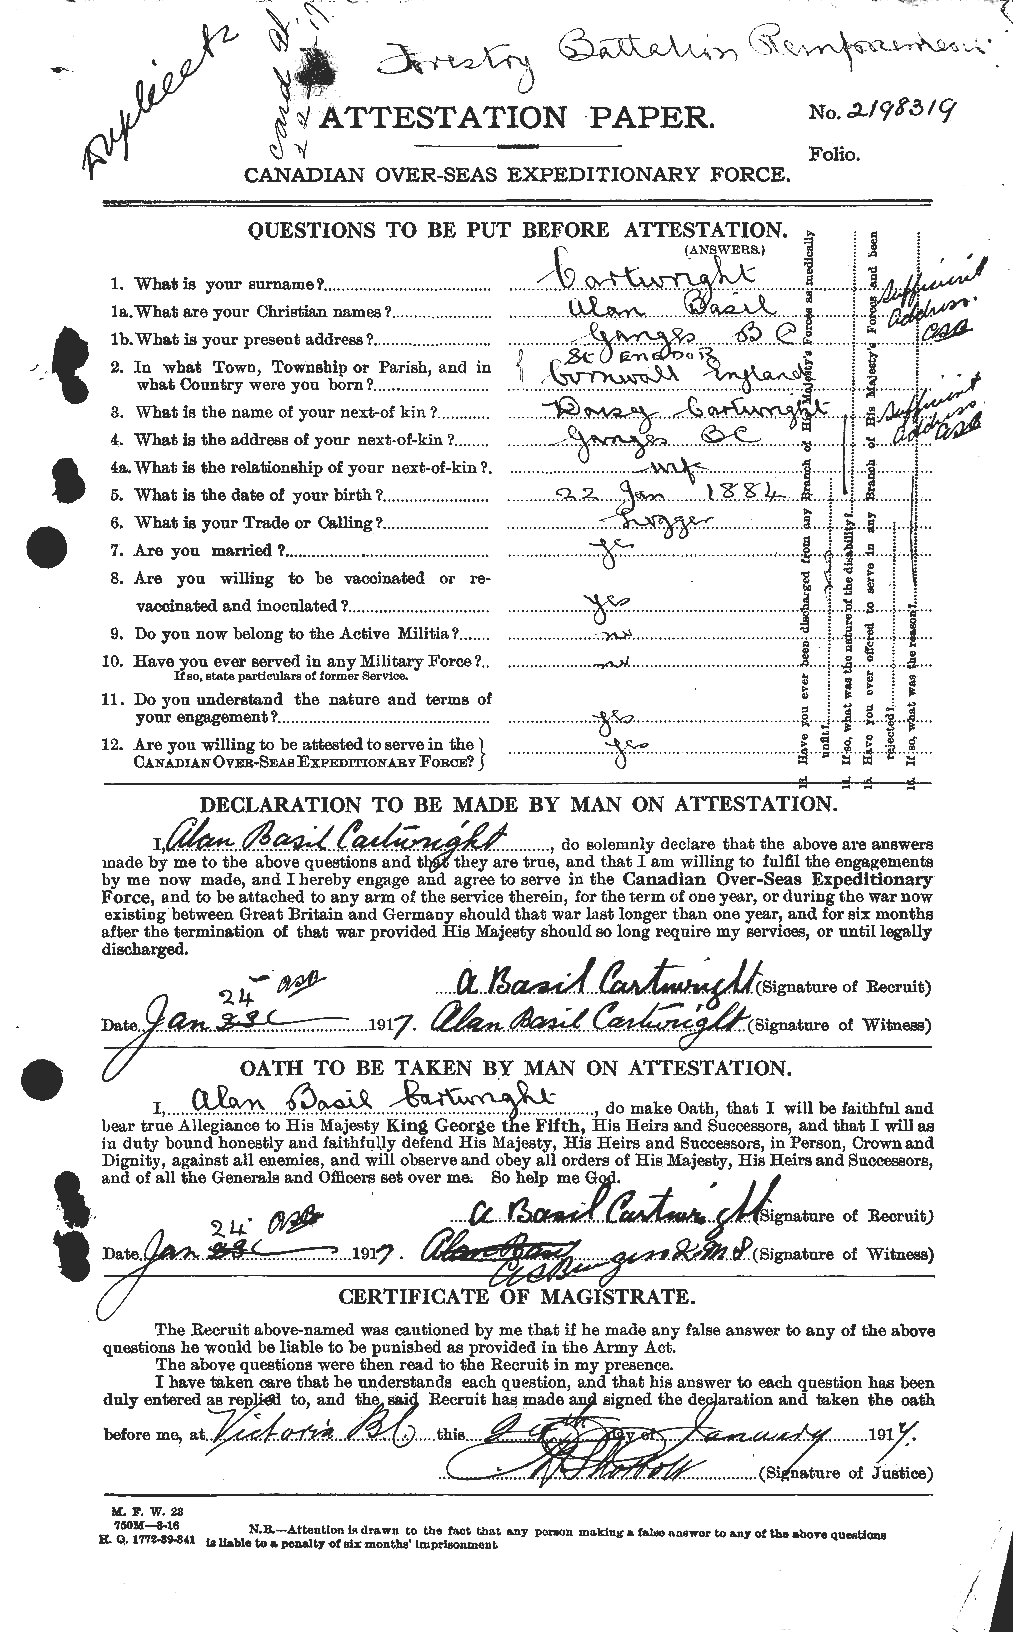 Personnel Records of the First World War - CEF 011542a